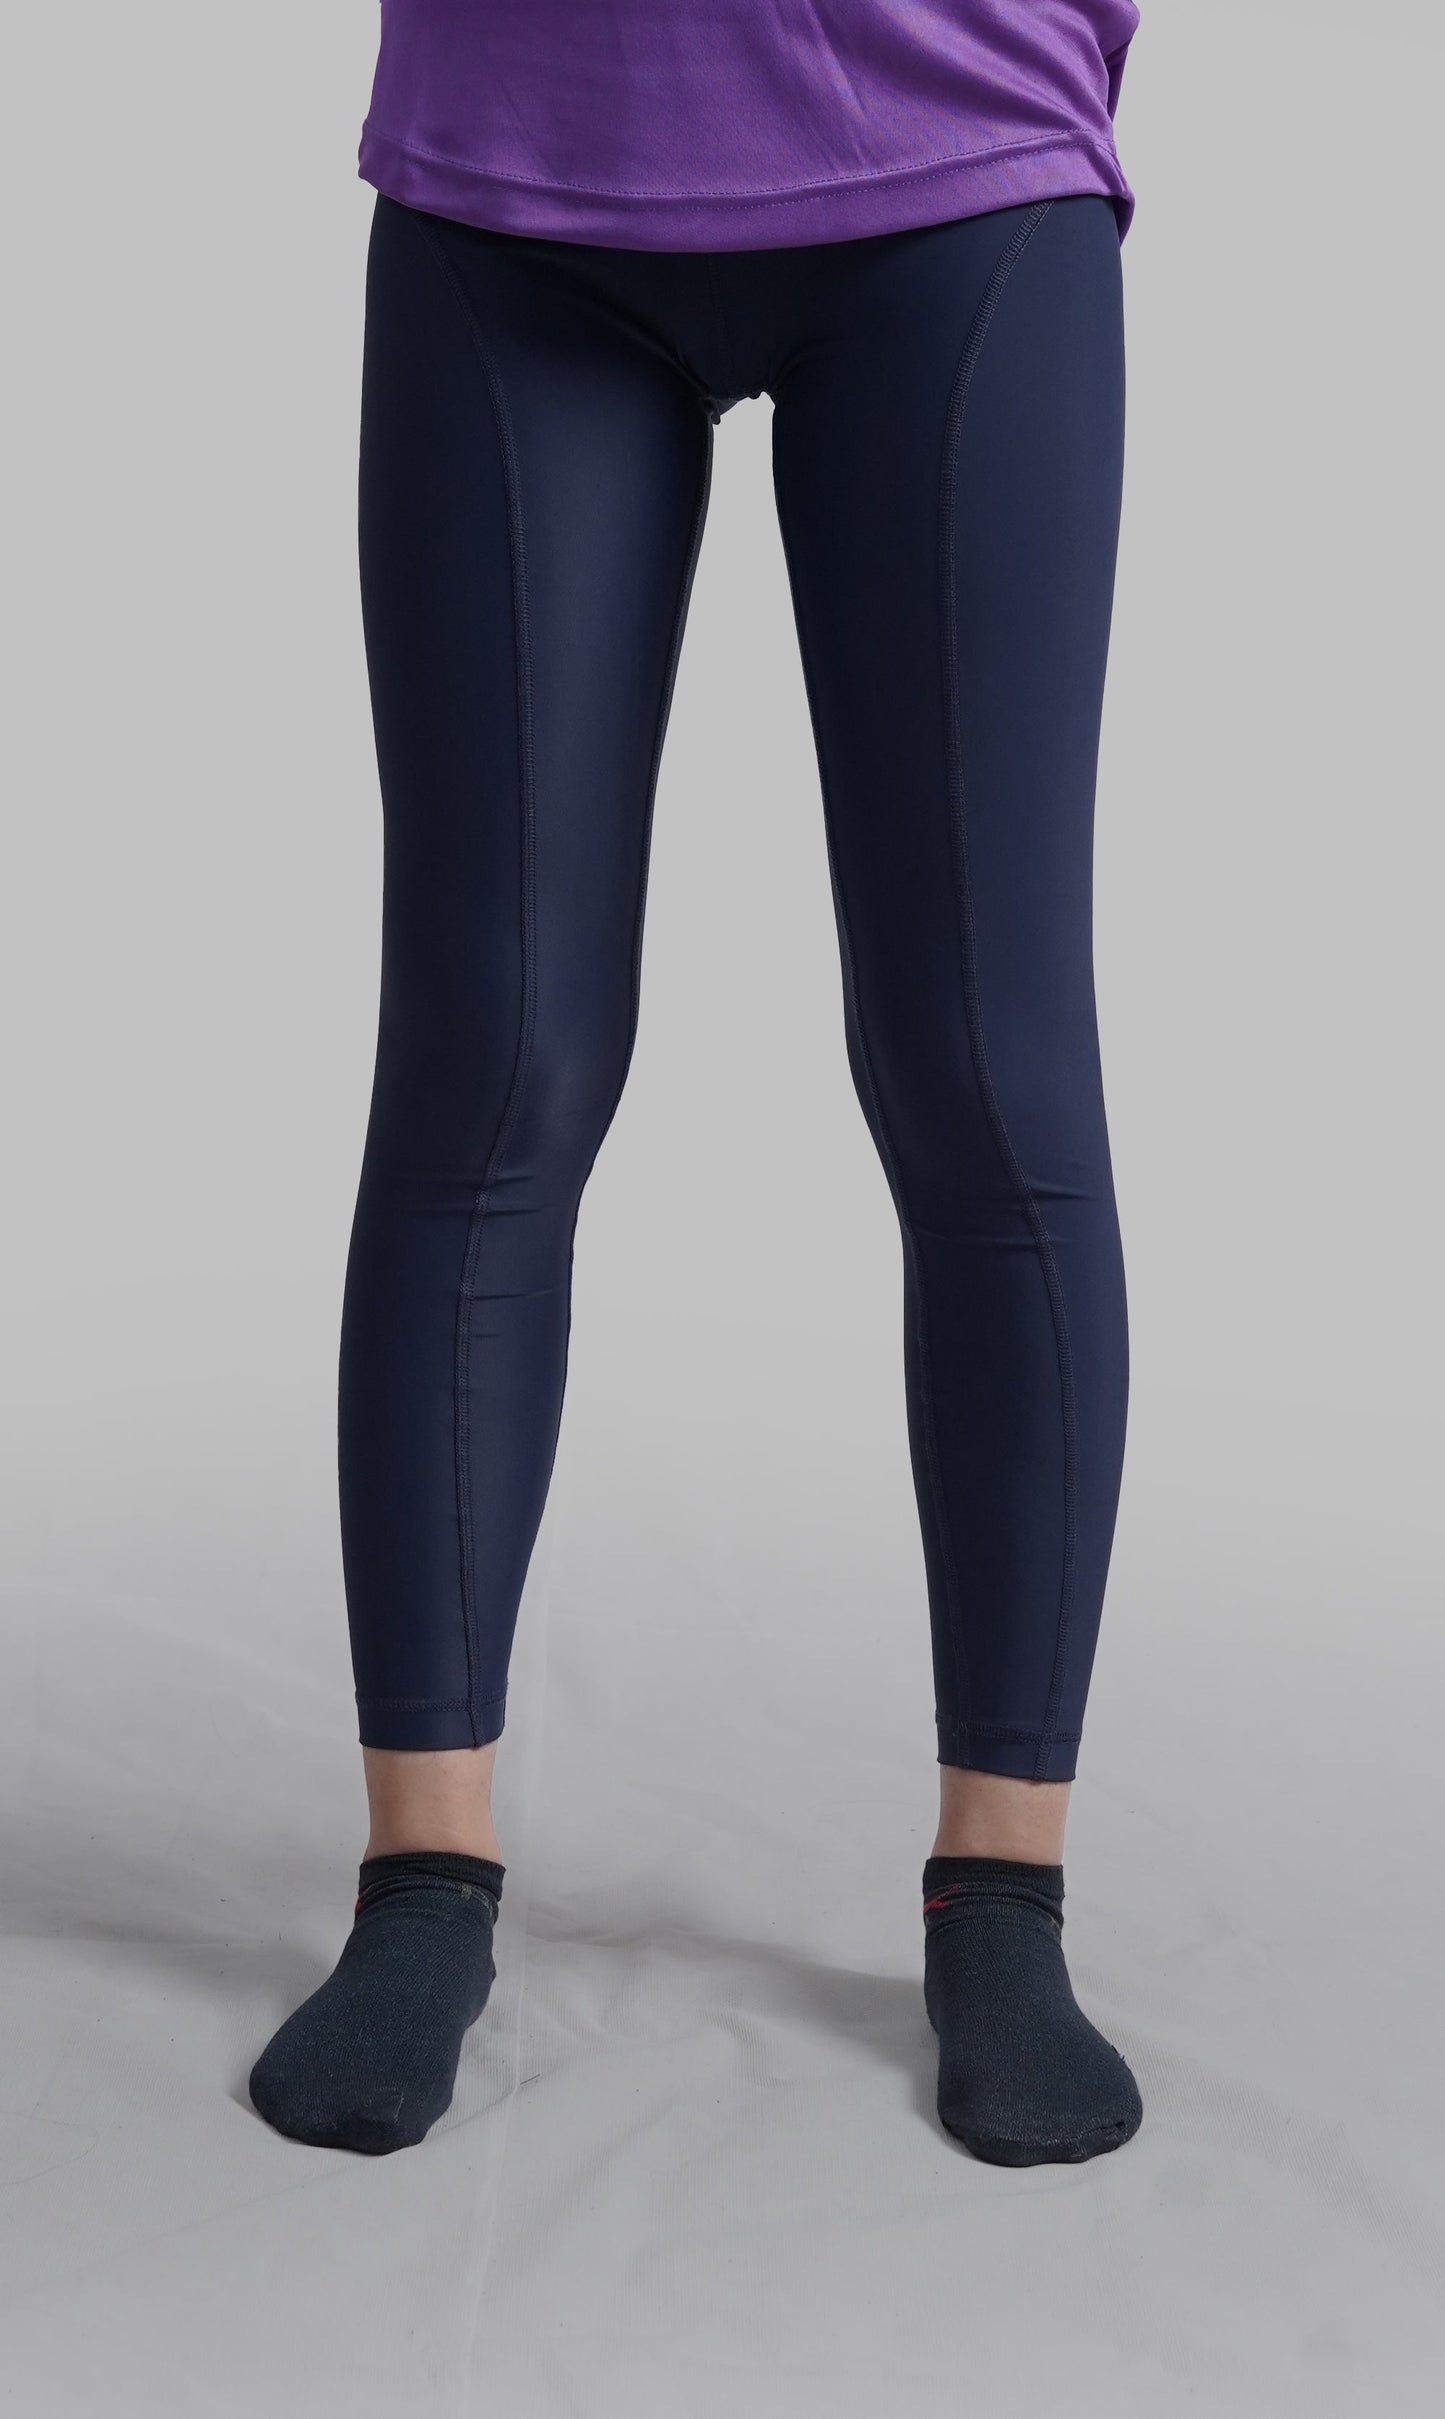 Stag Women Navy Blue Leggings - Stag Clothing 